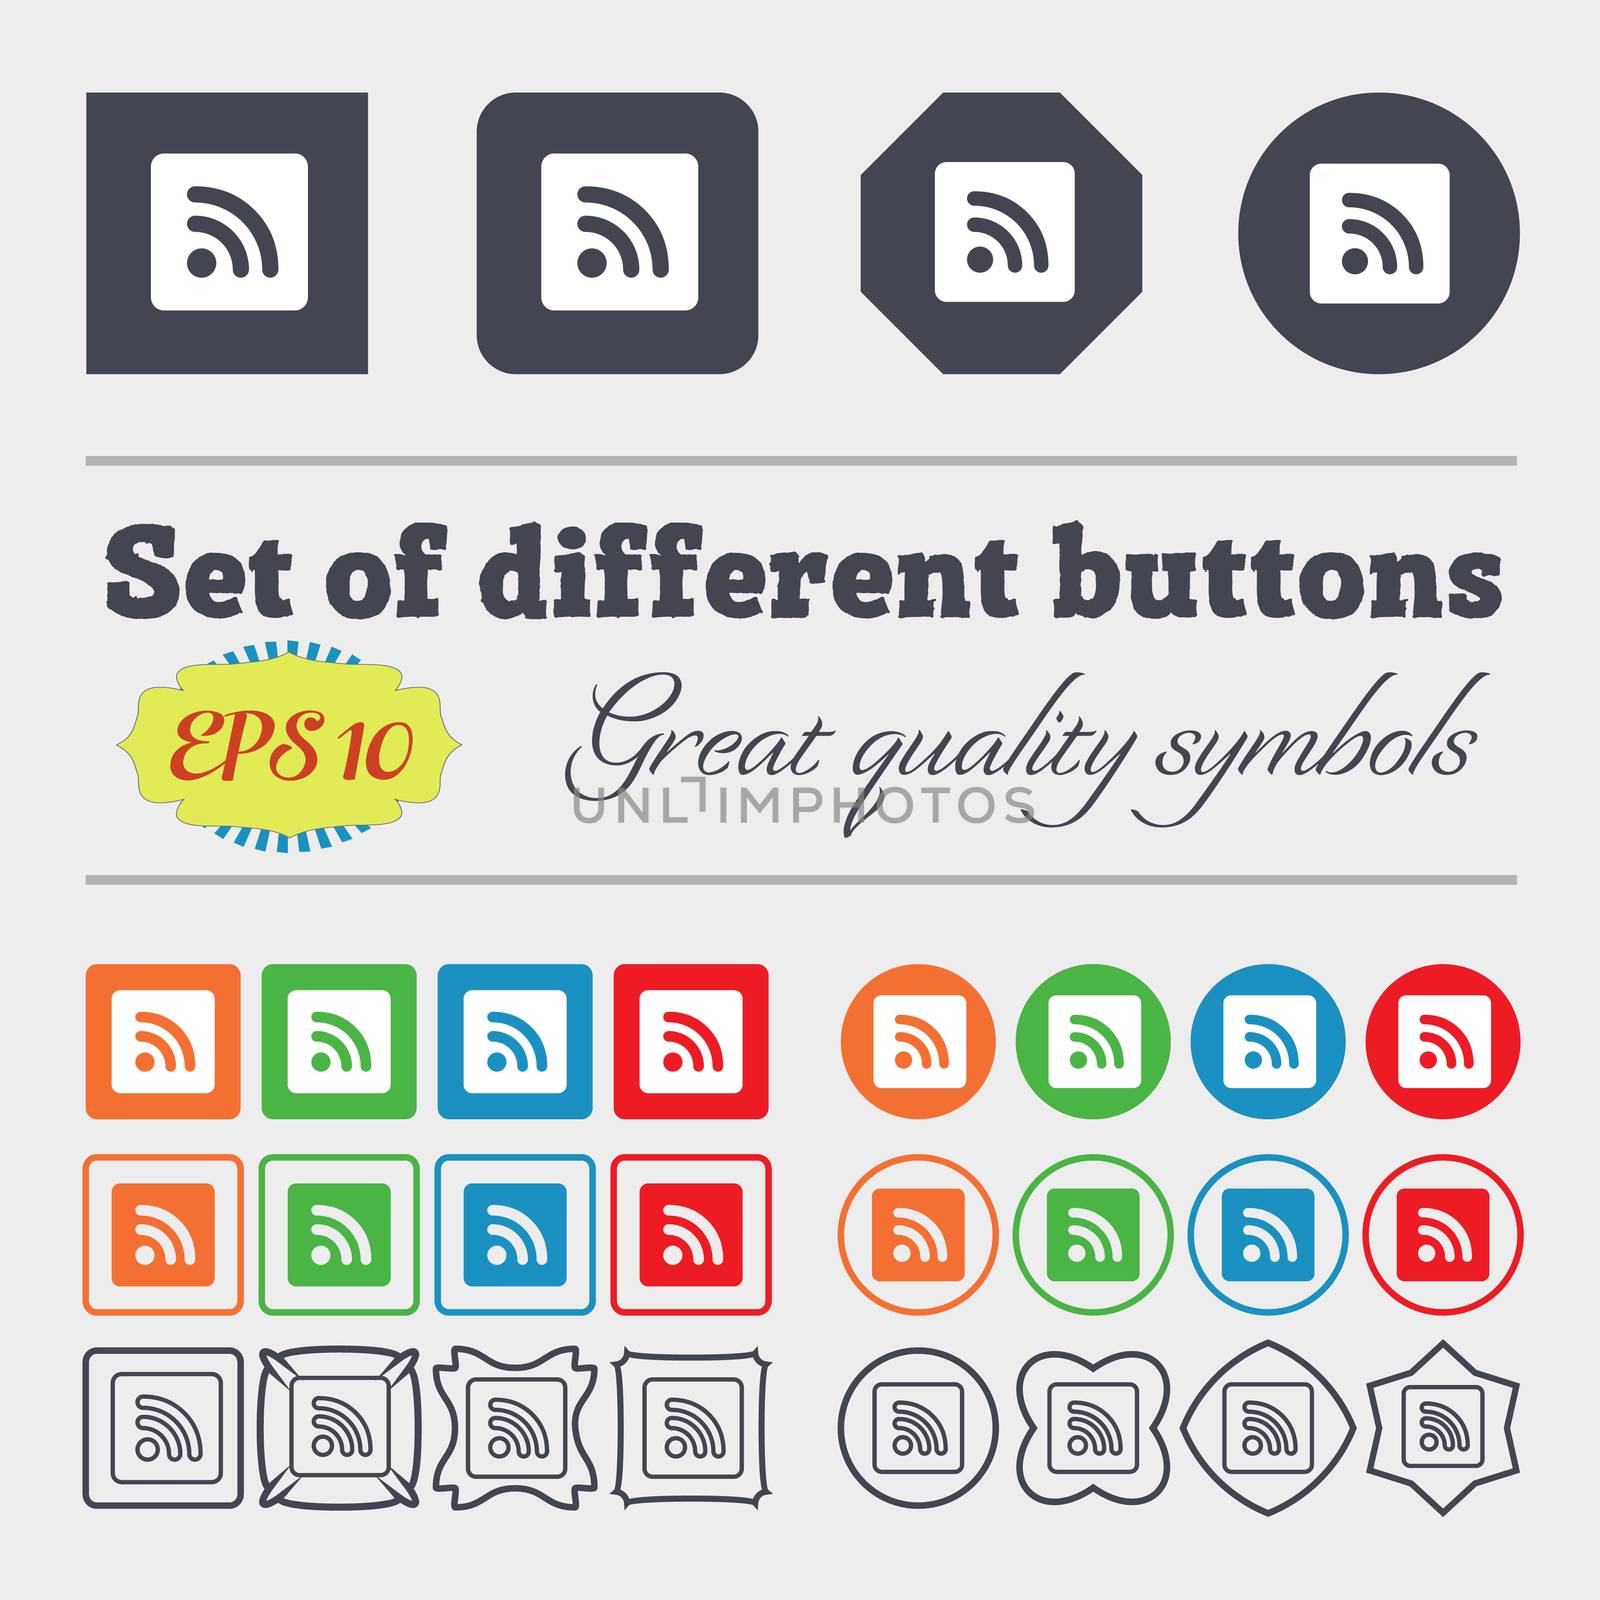 RSS feed icon sign. Big set of colorful, diverse, high-quality buttons. illustration